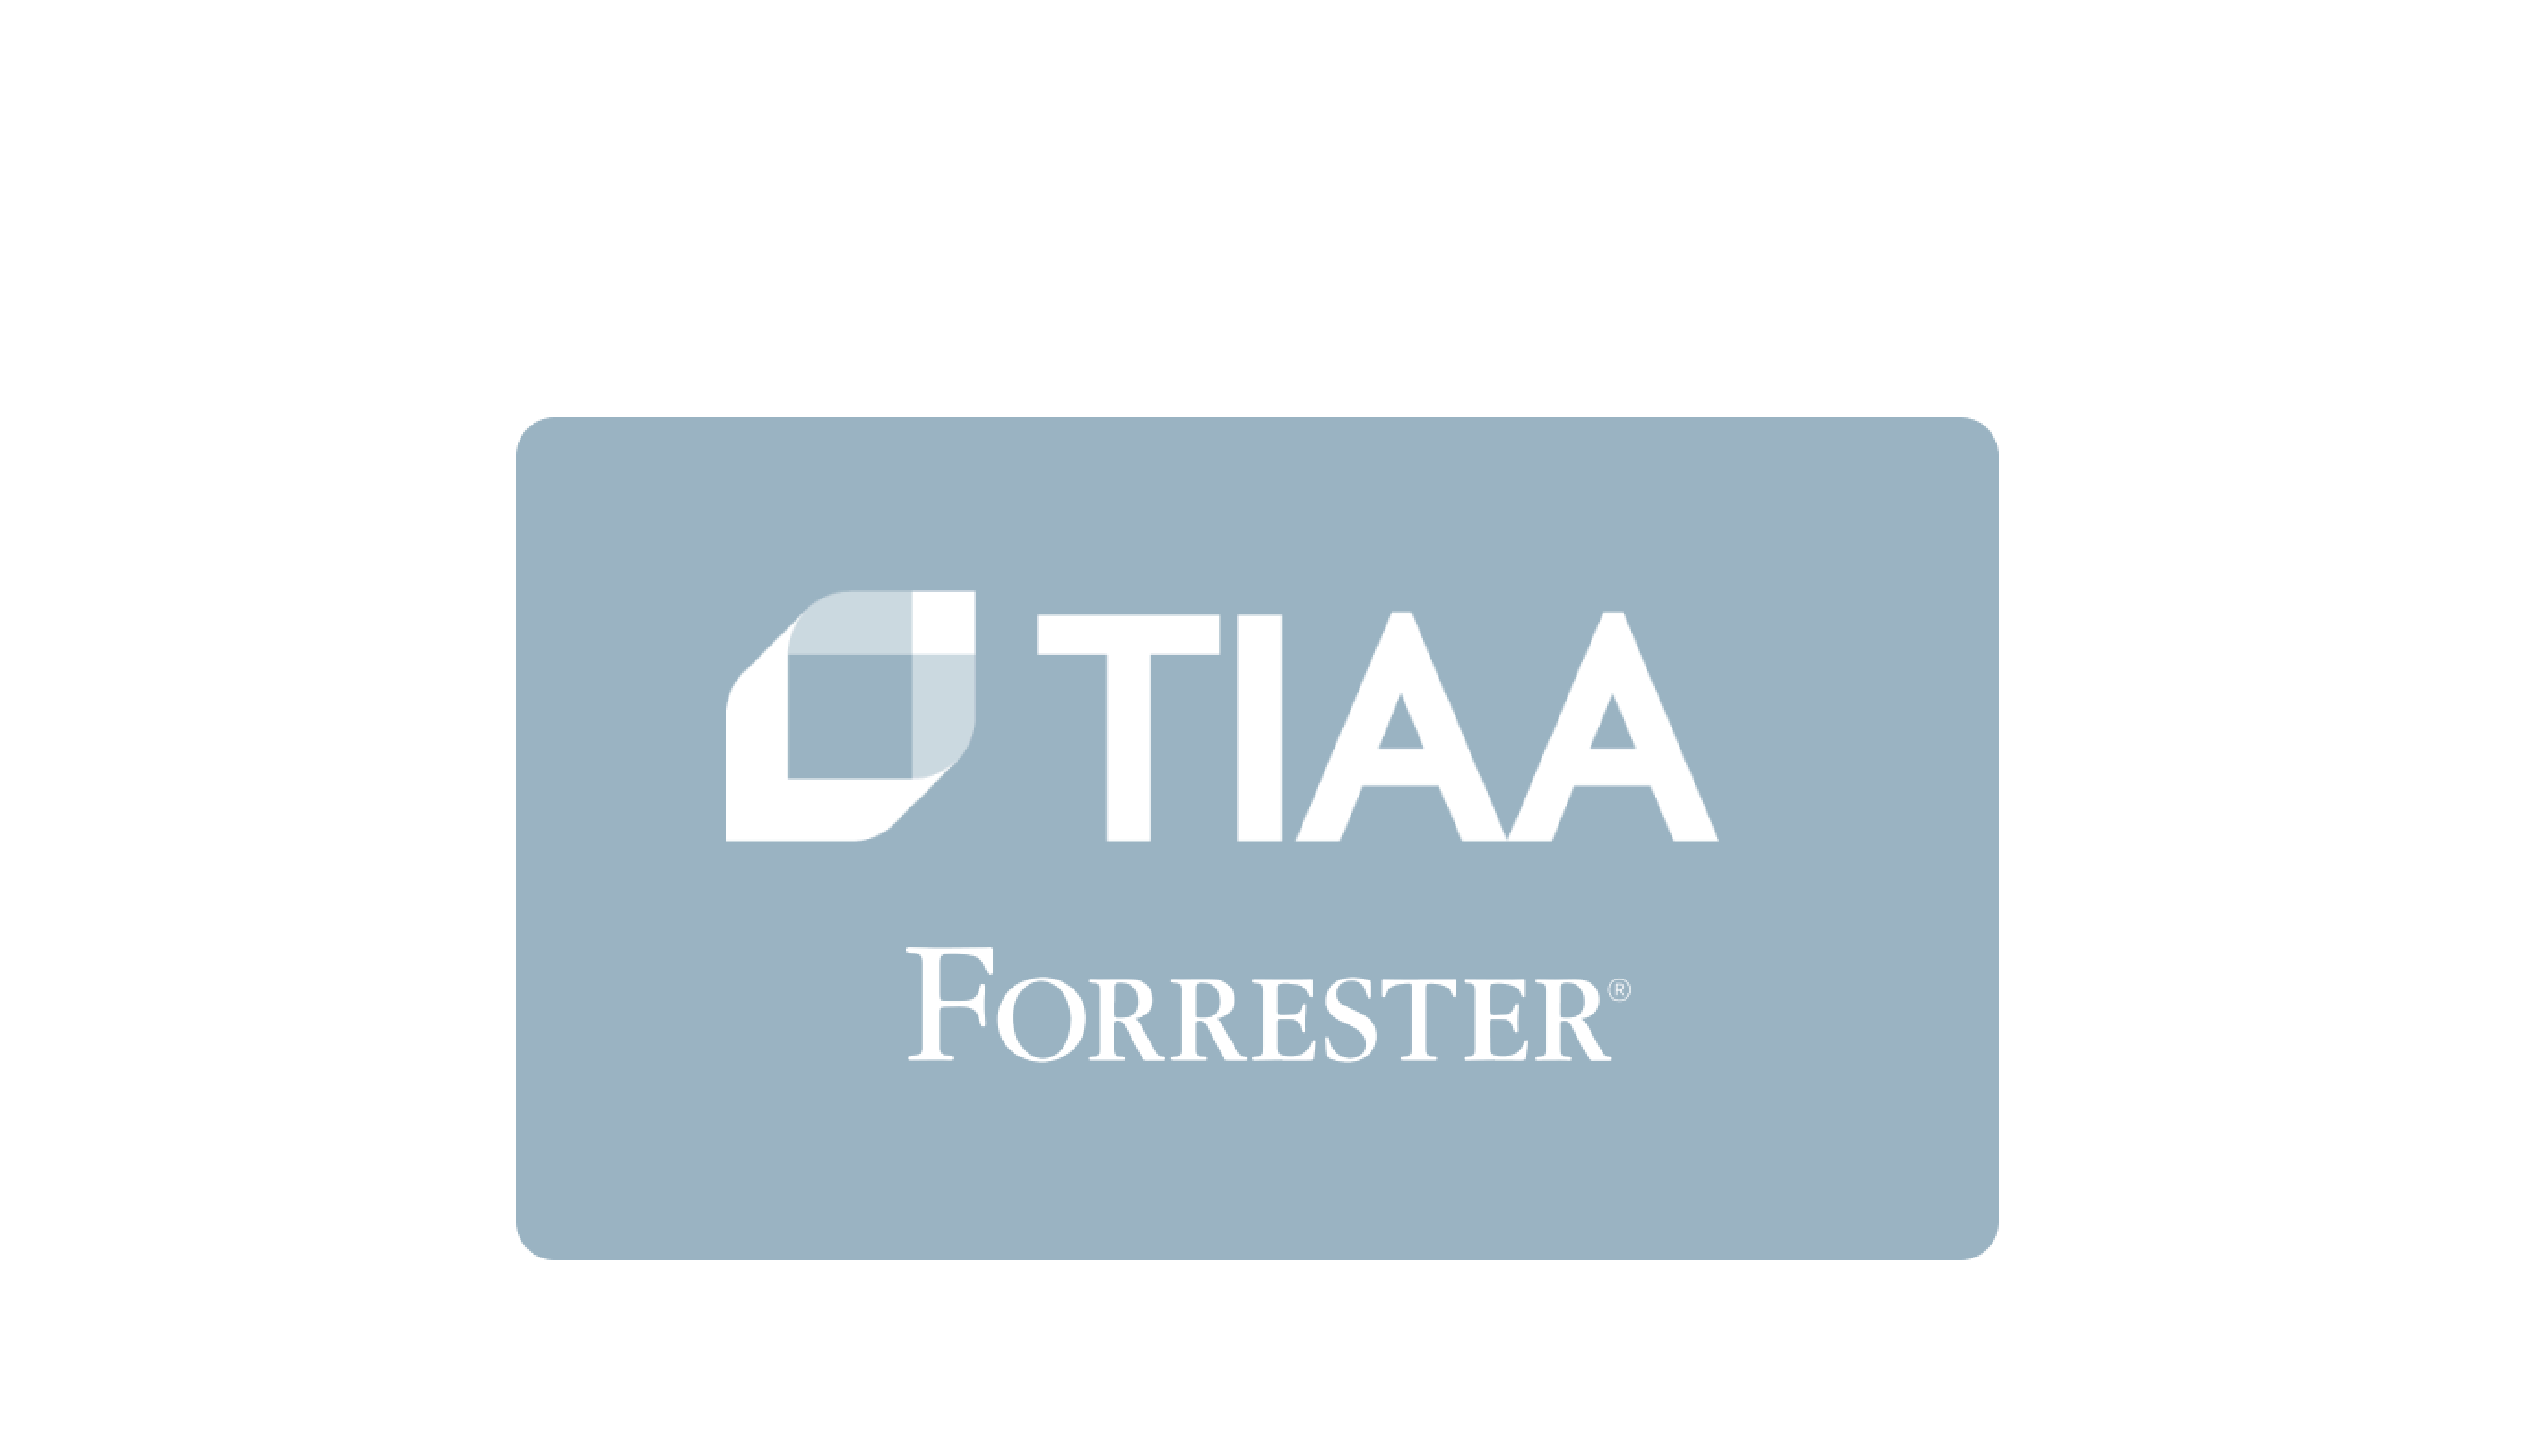 TIAA and Forrester logos